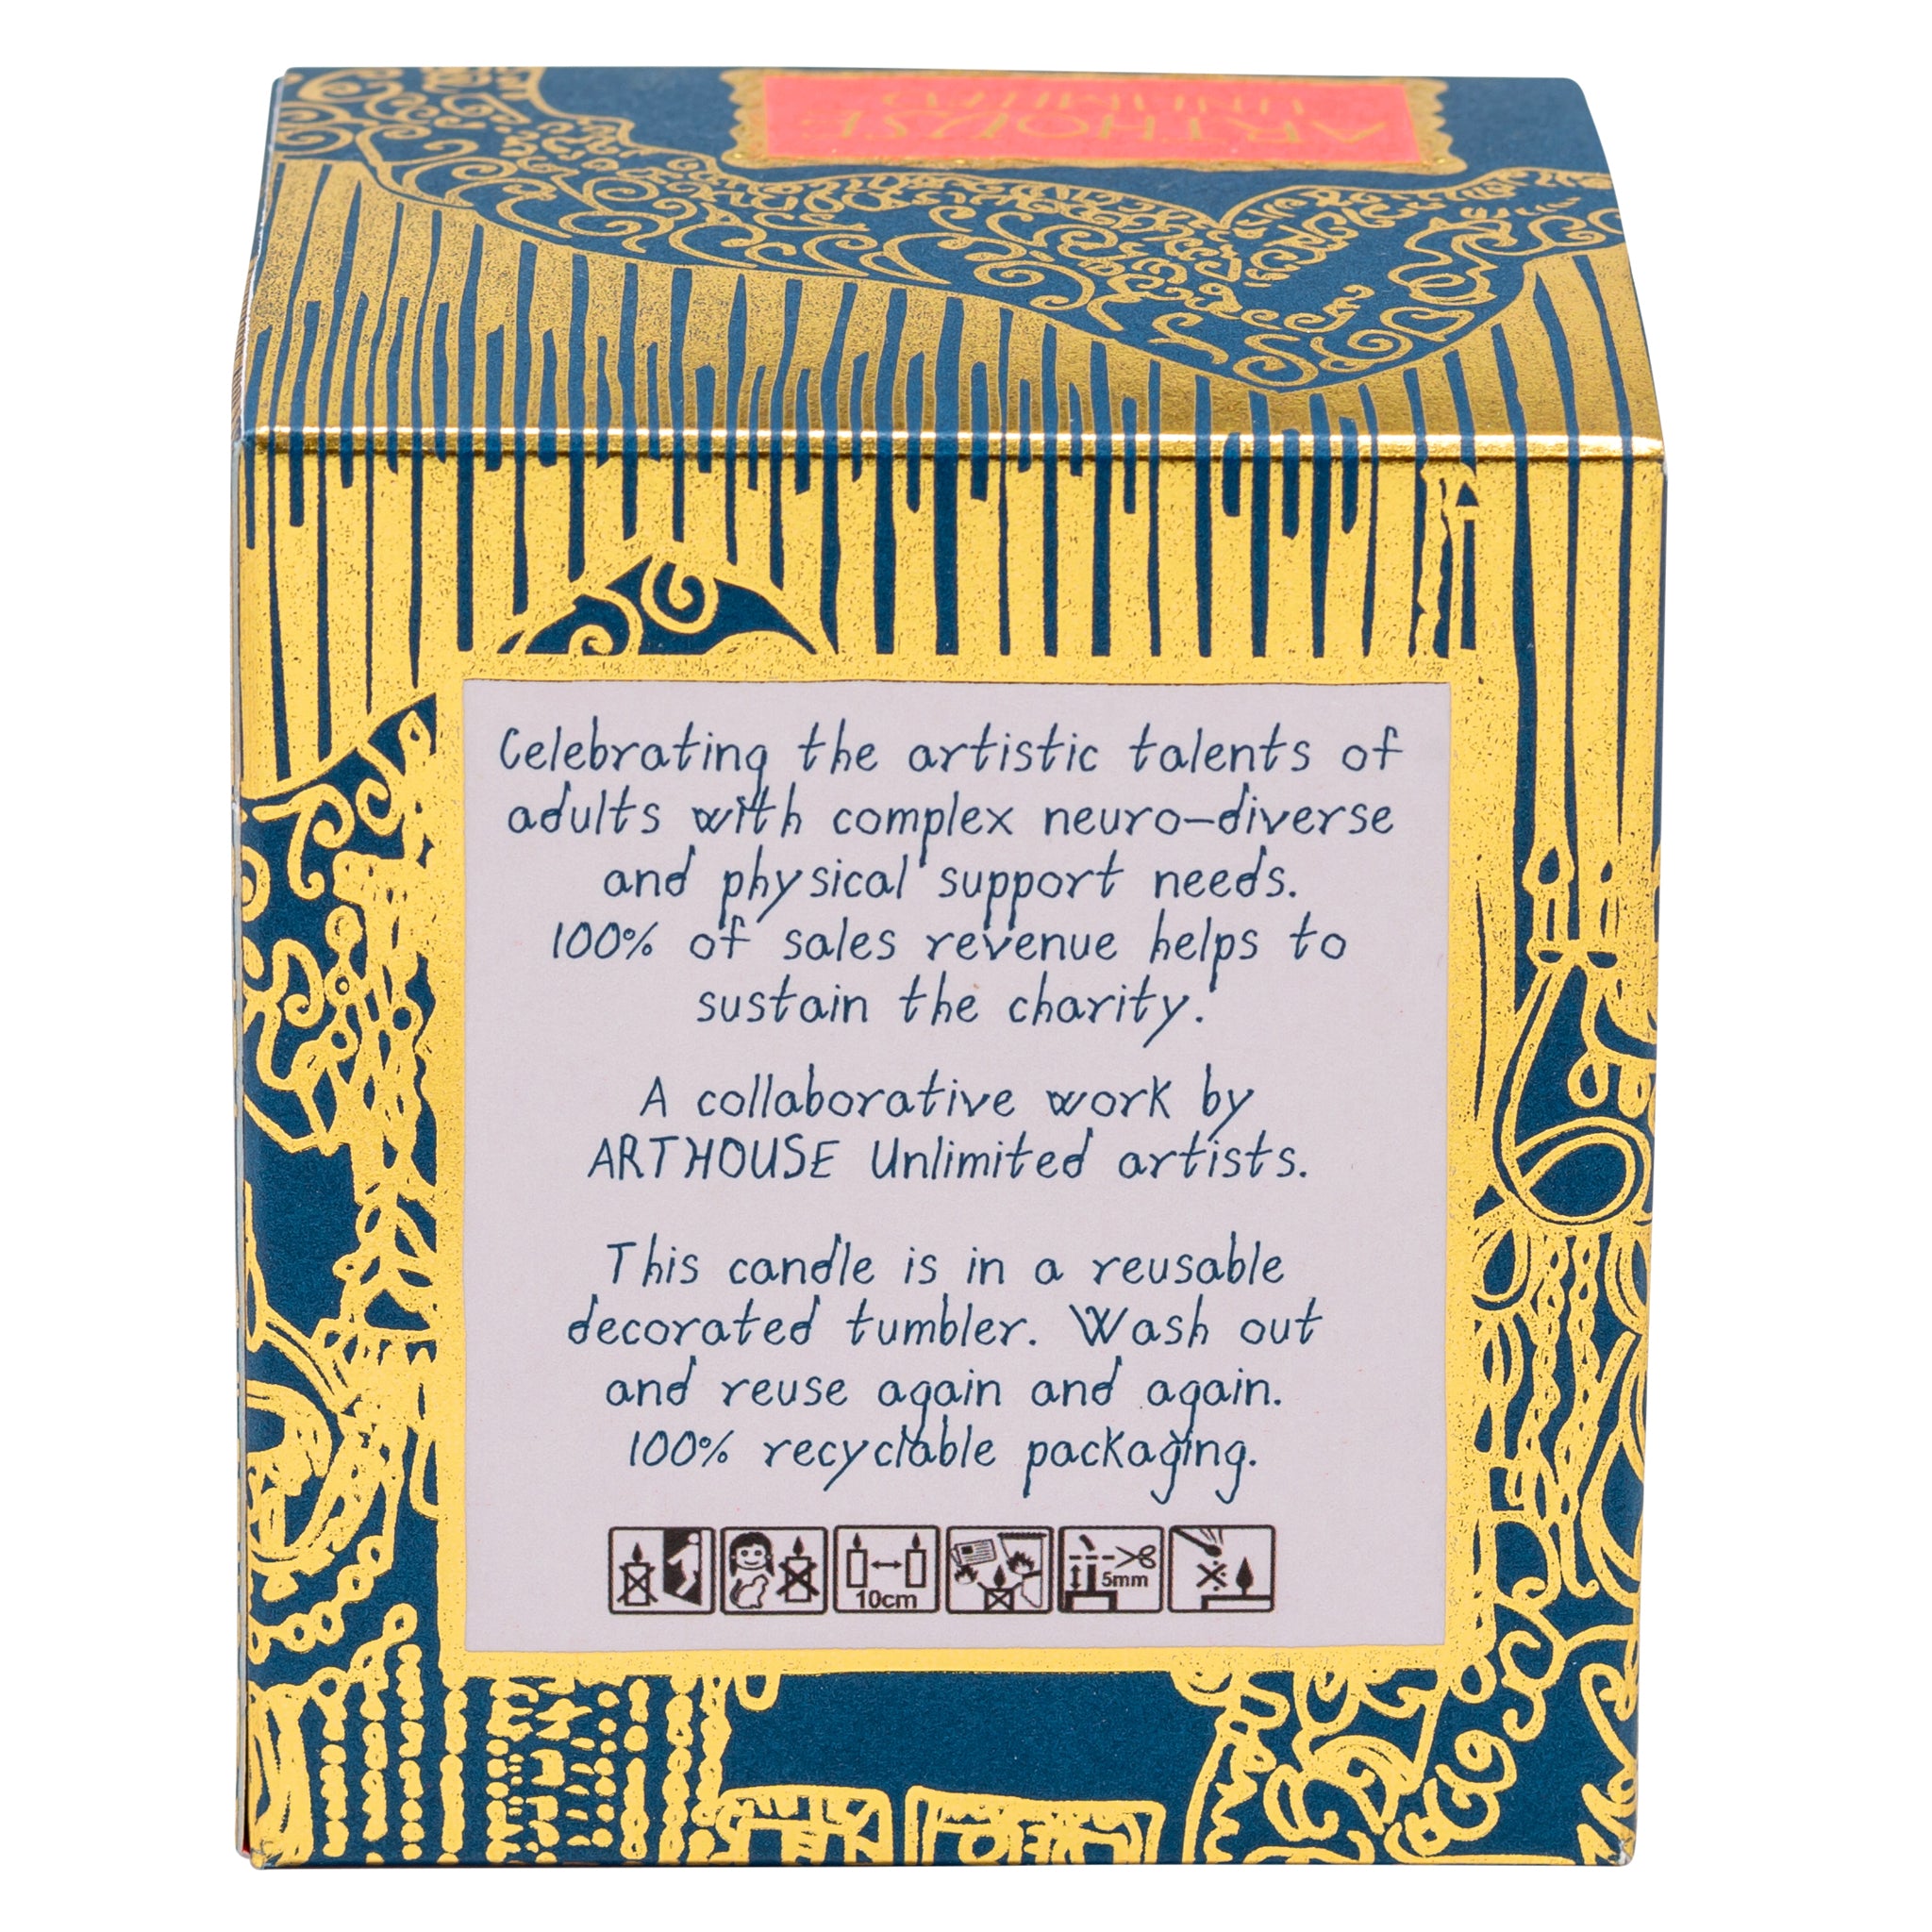 Angels of the Deep, Neroli Scented Plant Wax Candle, back of box